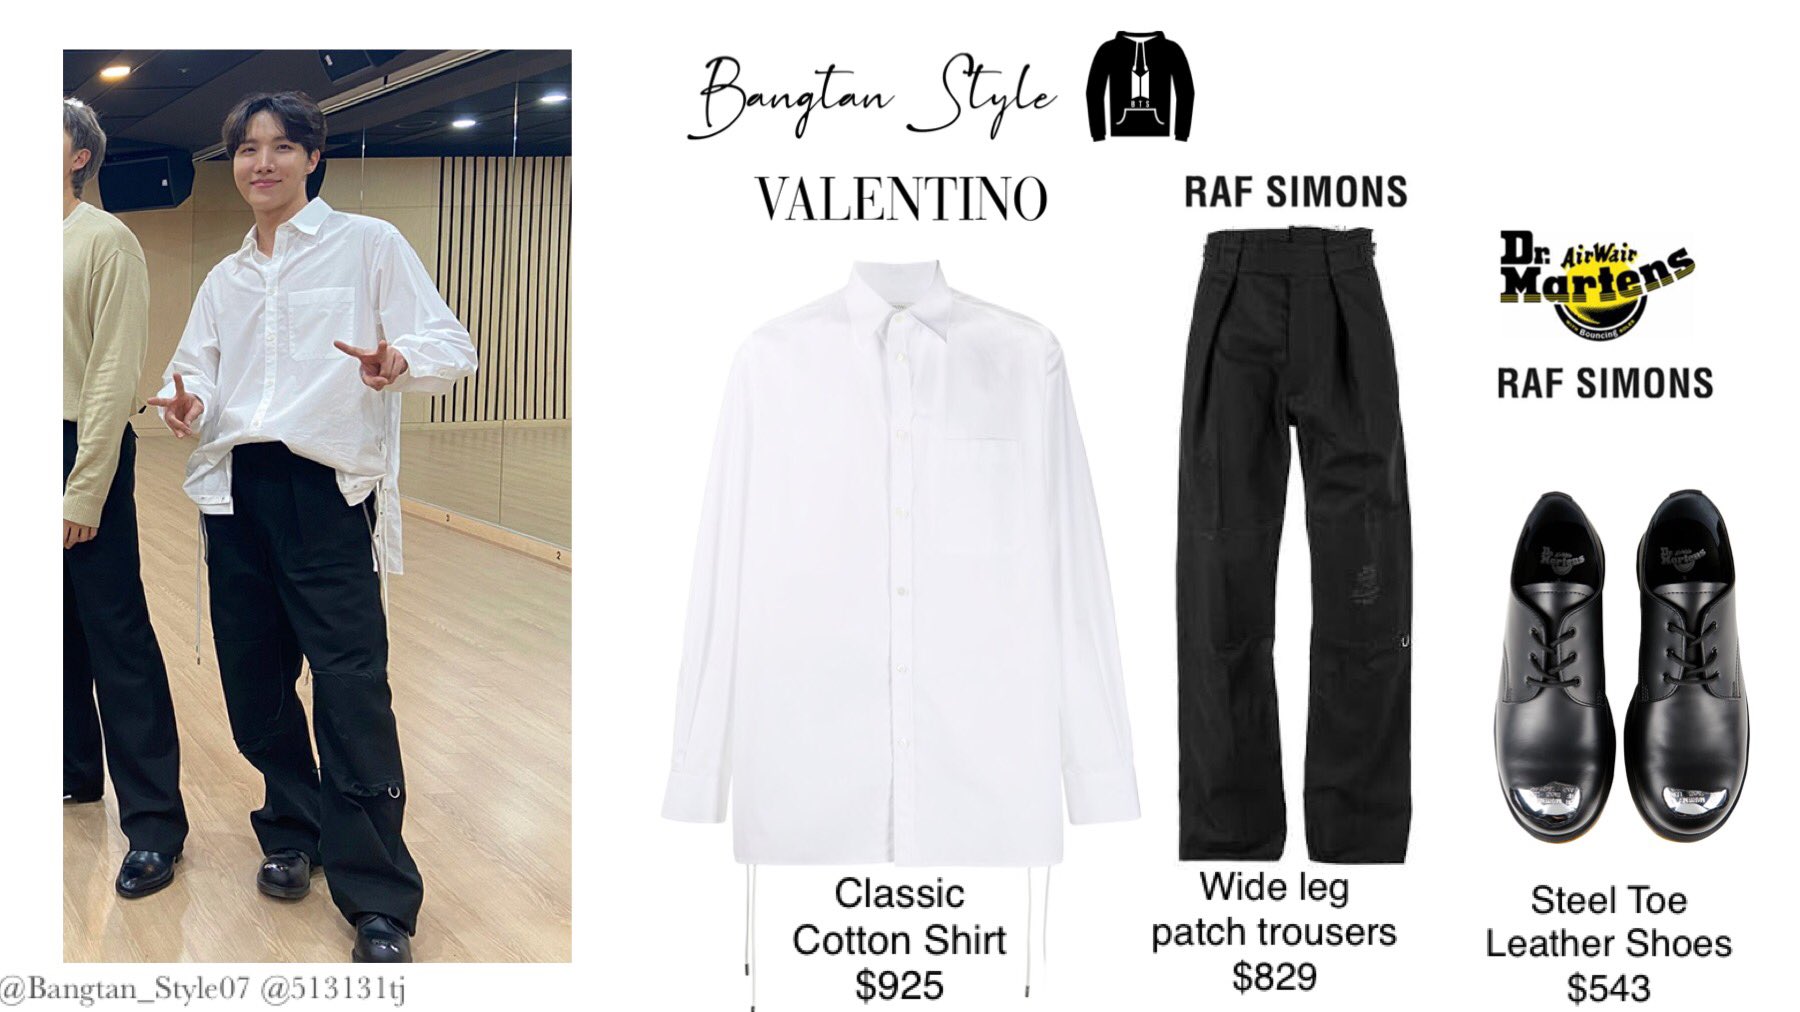 Bangtan Style⁷ (slow) on X: BTS at THE TONIGHT SHOW D1 Jungkook